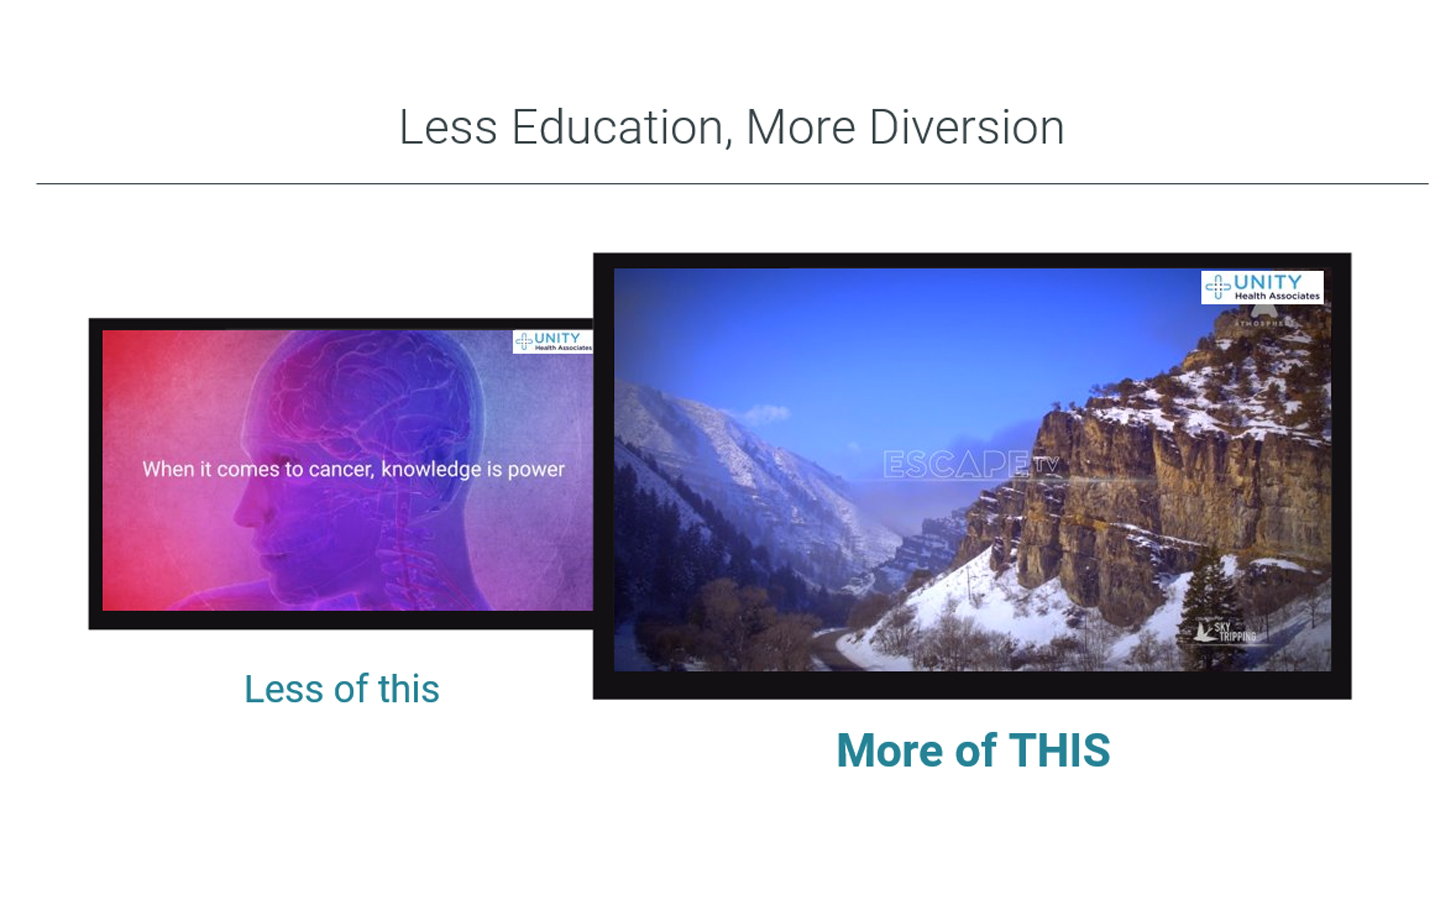 Two images with the headline "Less Education, More Diversion." The image on the left is portraying anatomy of the head; the image on the right features snowcapped mountains.